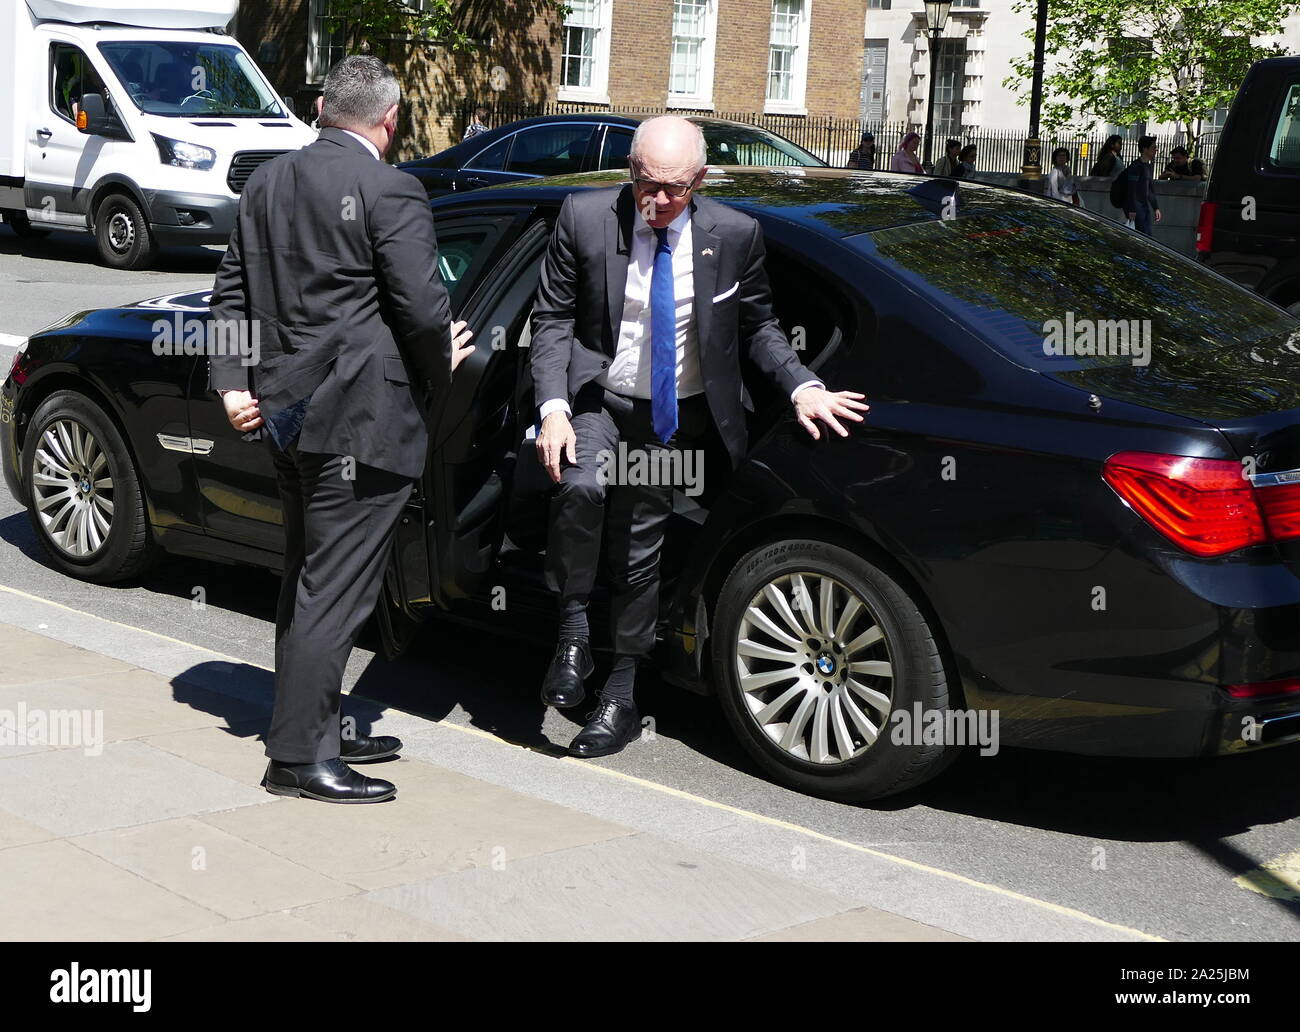 US Ambassador to the UK arrives at the Cabinet Office for talks ahead of the visit of the US President, Donald Trump. Robert Wood 'Woody' Johnson IV (born April 12, 1947) is an American businessman, philanthropist, and diplomat who is currently serving as United States Ambassador to the United Kingdom Stock Photo